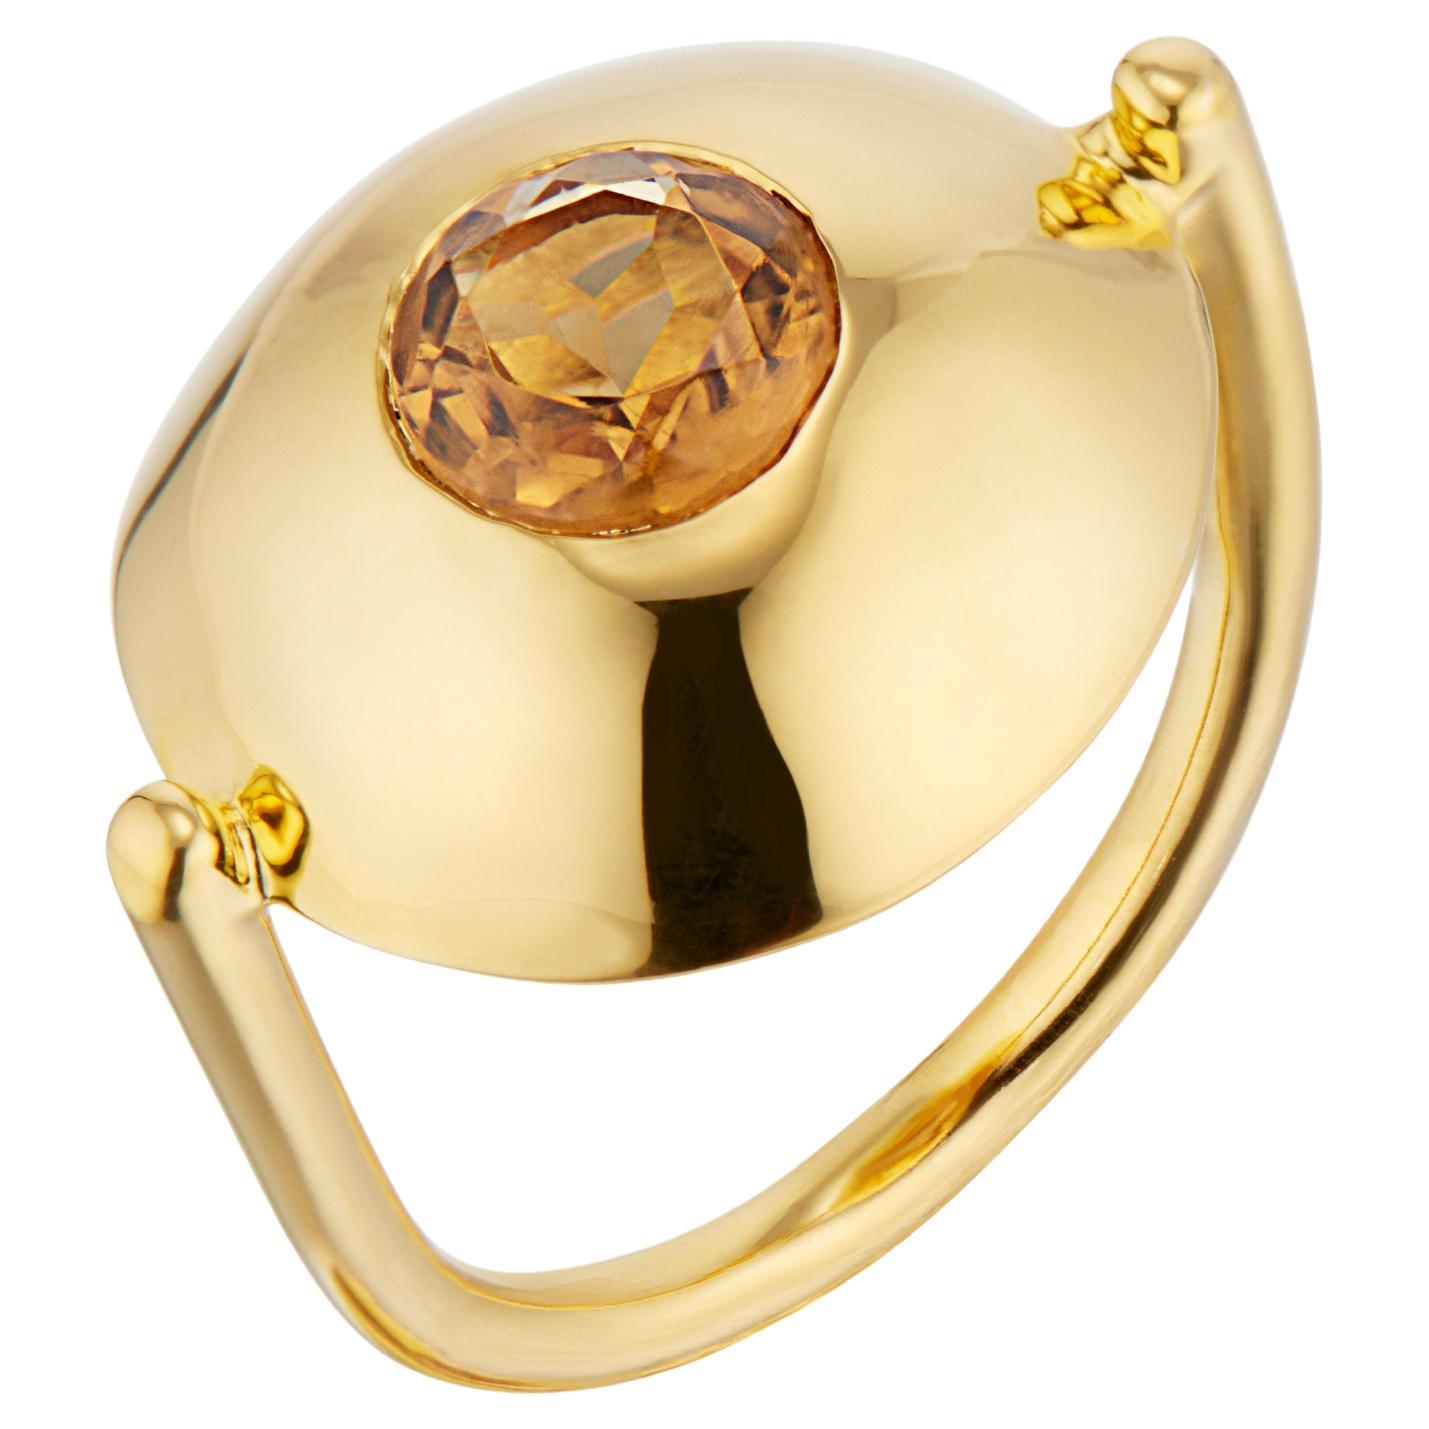 22 Karat Gold Vermeil Orbit Ring with Yellow Citrine by Chee Lee New York For Sale